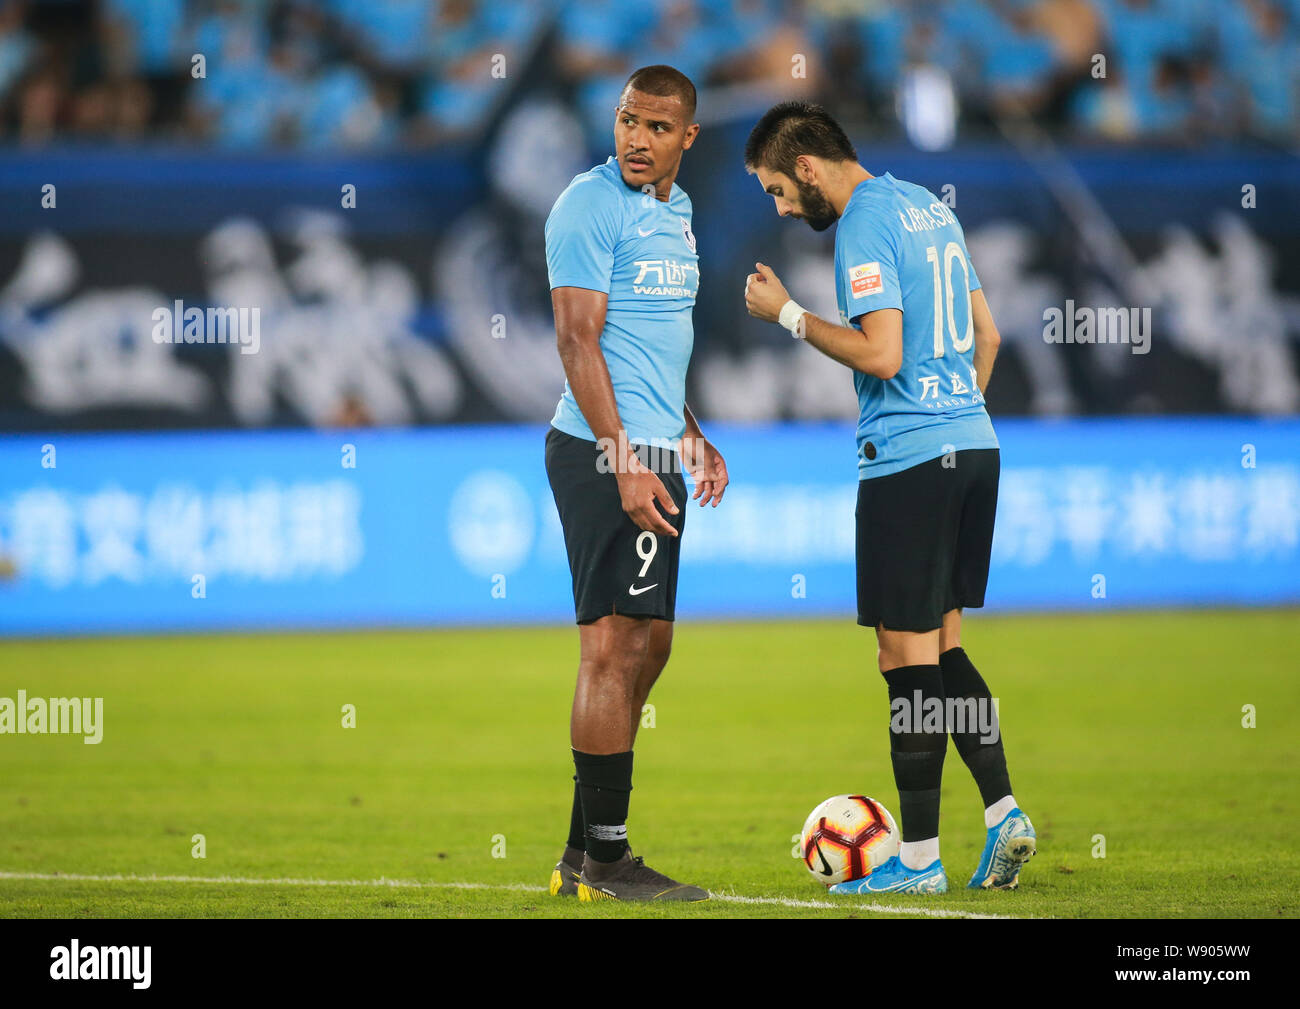 Belgian football player Yannick Ferreira Carrasco of Dalian Yifang F.C.,  right, talks with Venezuelan football player Salomon Rondon of Dalian  Yifang F.C., left, during the 23th round of Chinese Football Association  Super